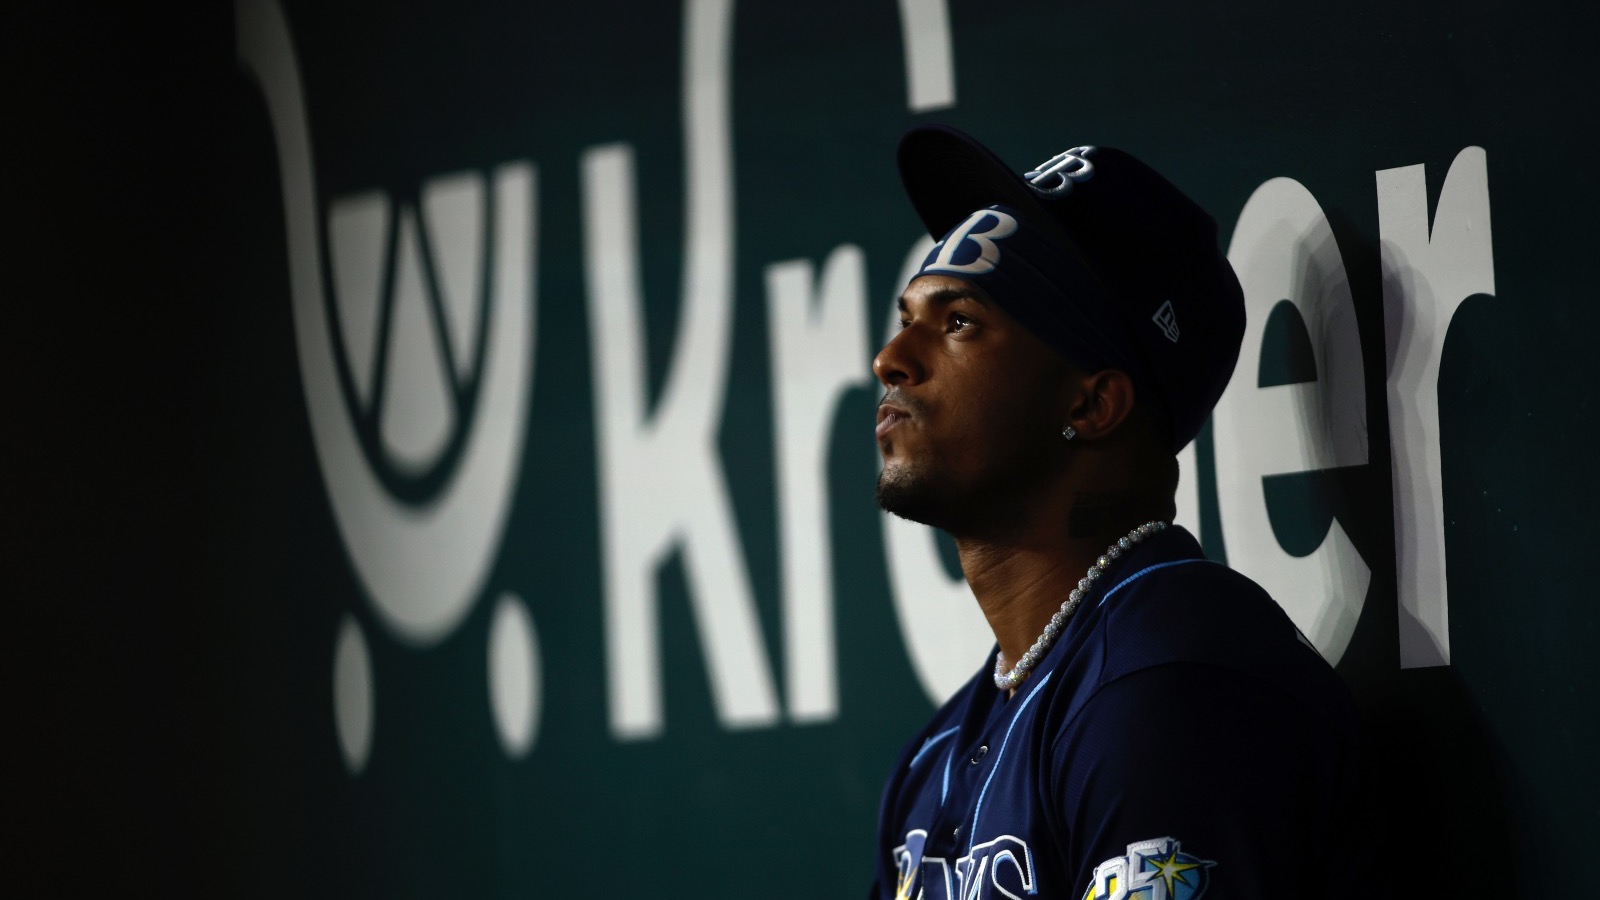 Rays' Wander Franco 'very unlikely' to play in MLB again (report) 